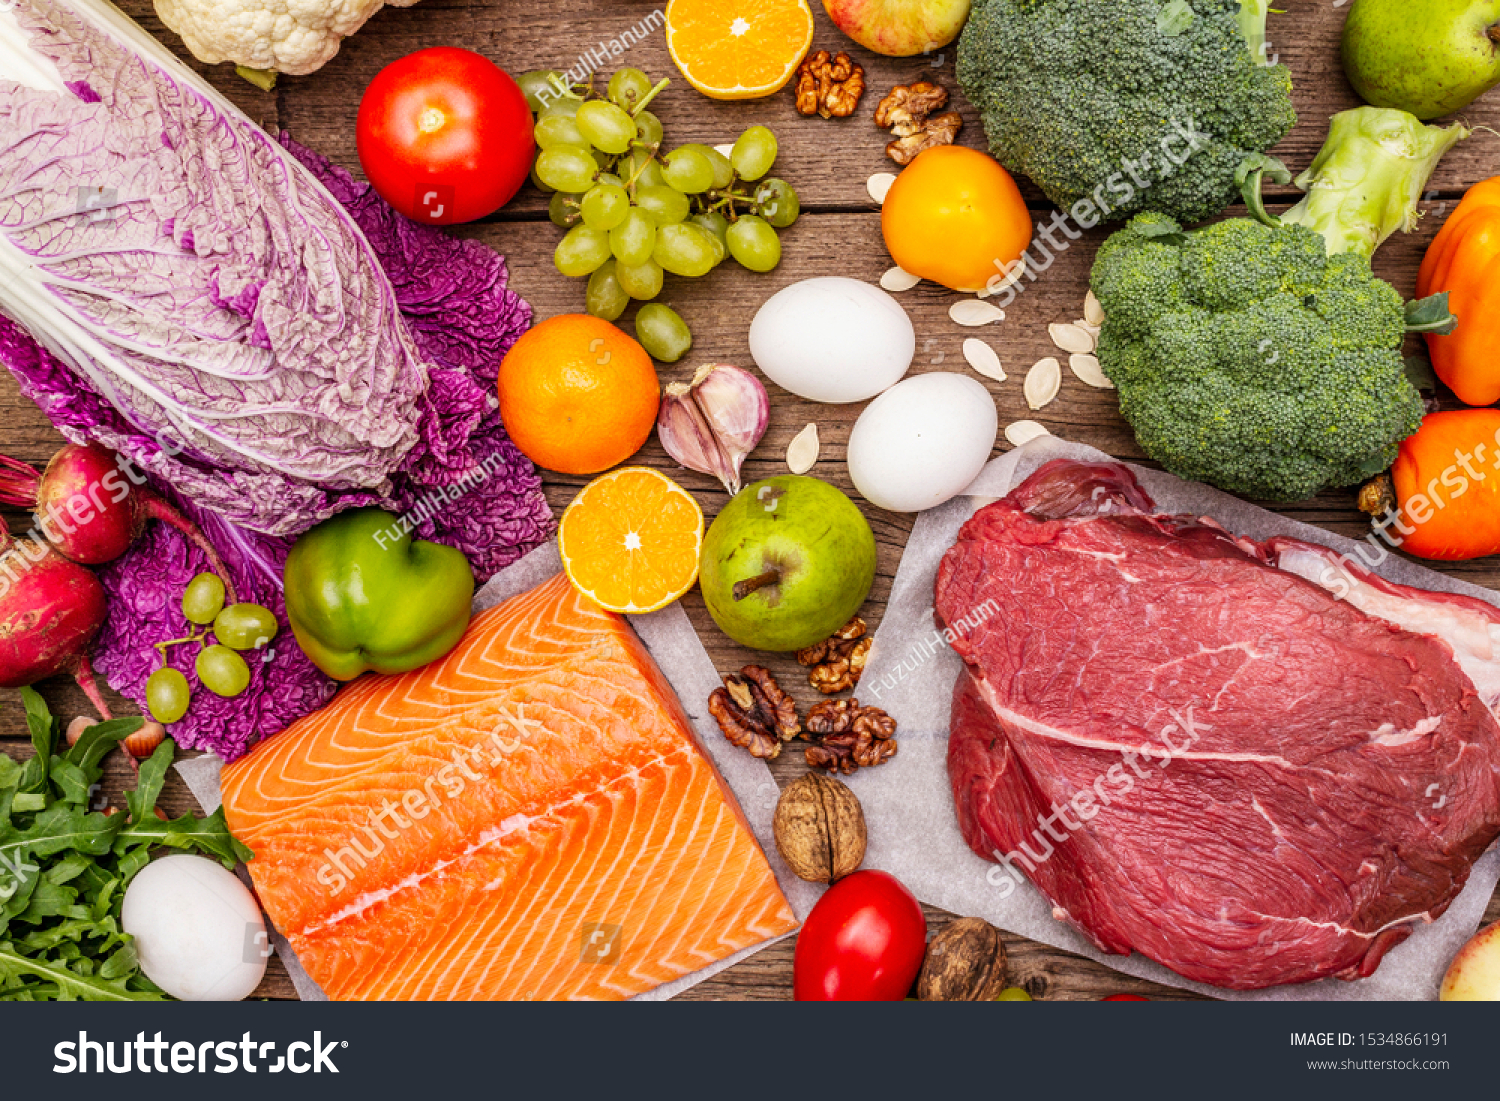 Trending paleo/pegan diet. Healthy balanced food concept. Set of fresh products, raw meat, salmon, vegetables and fruits. Old wooden boards background, top view #1534866191